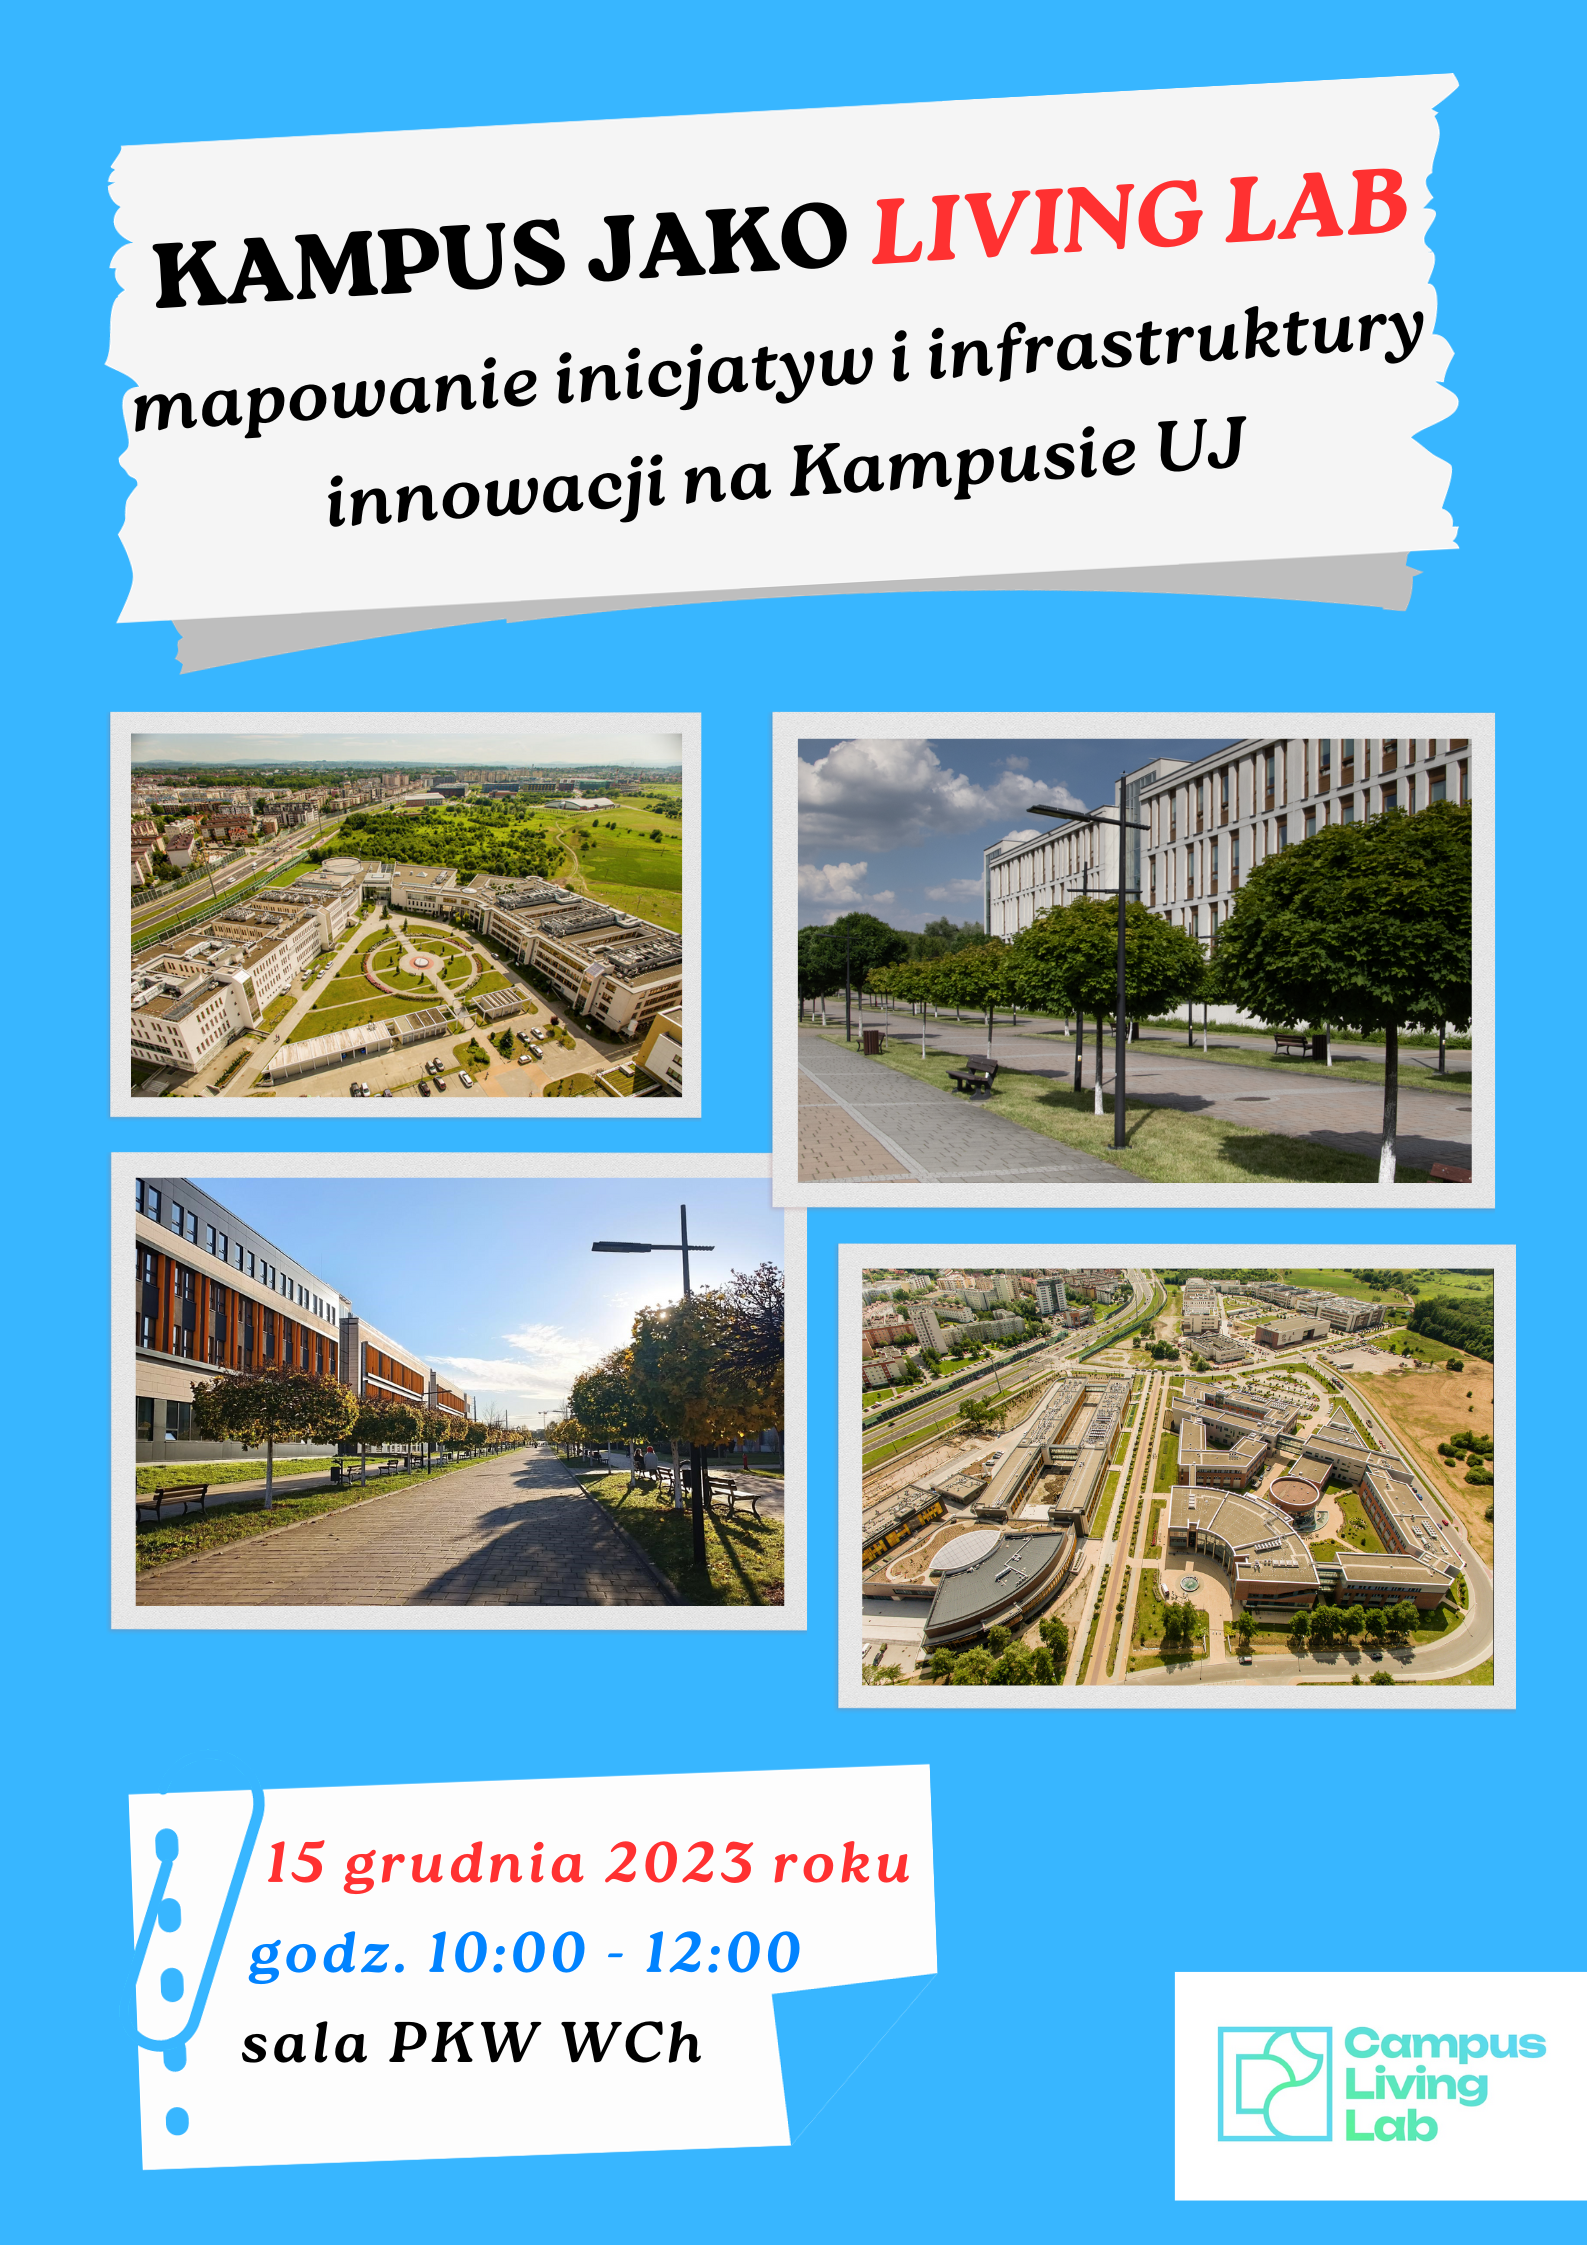 The Campus as a living lab: mapping innovation initiatives and infrastructure on the Jagiellonian University Campus [workshop invitation]